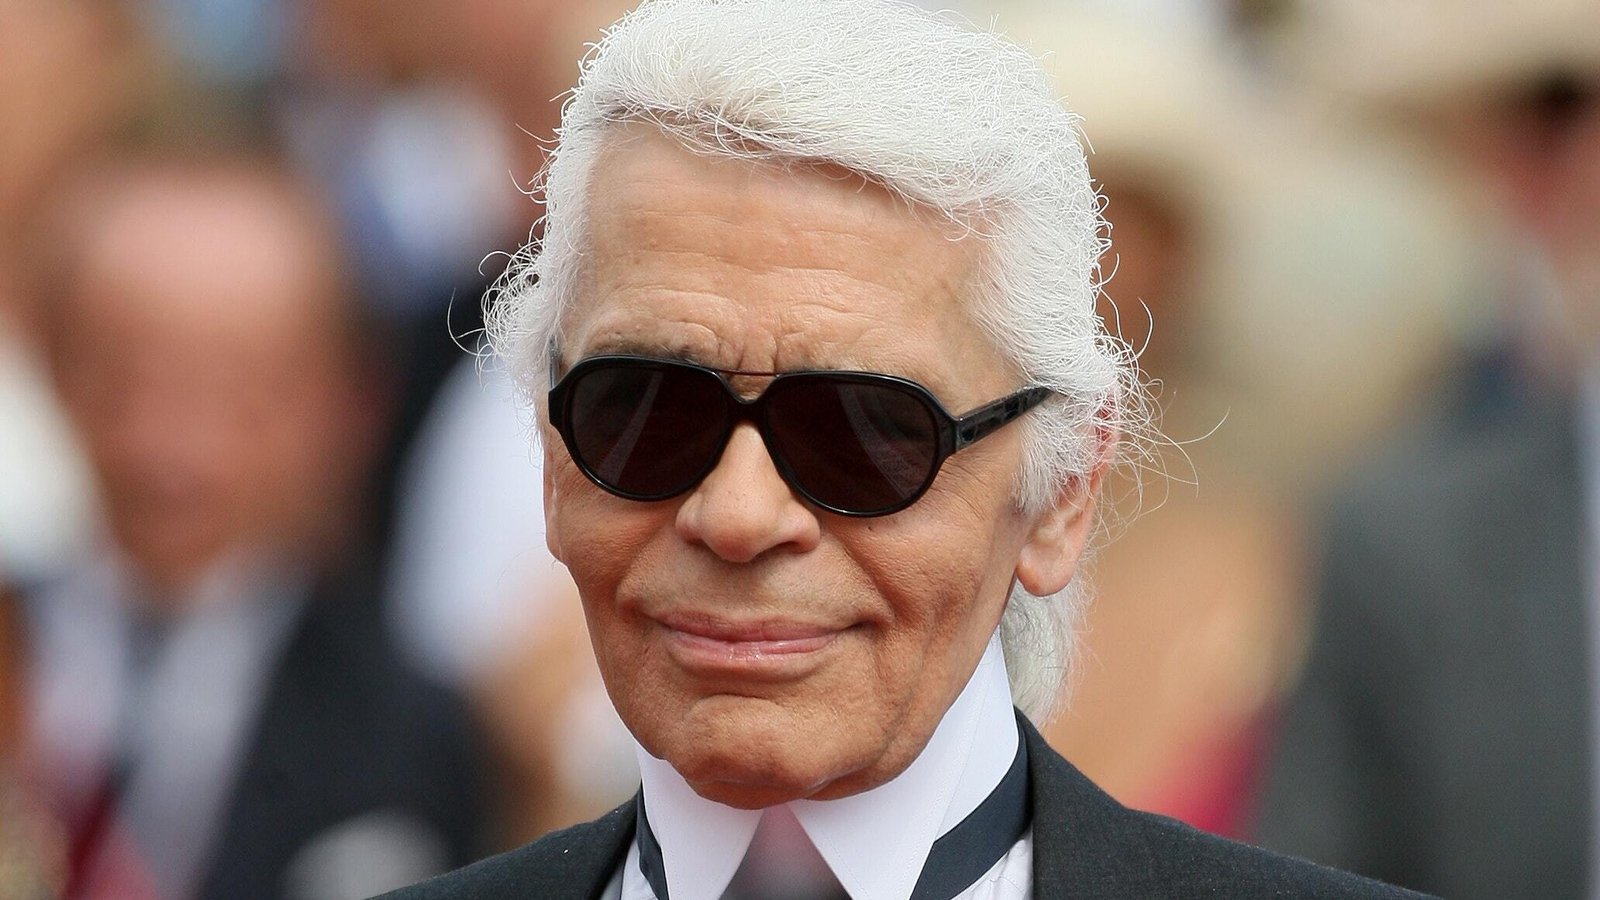 How Karl Lagerfeld's Signature Look Transformed Over the Years